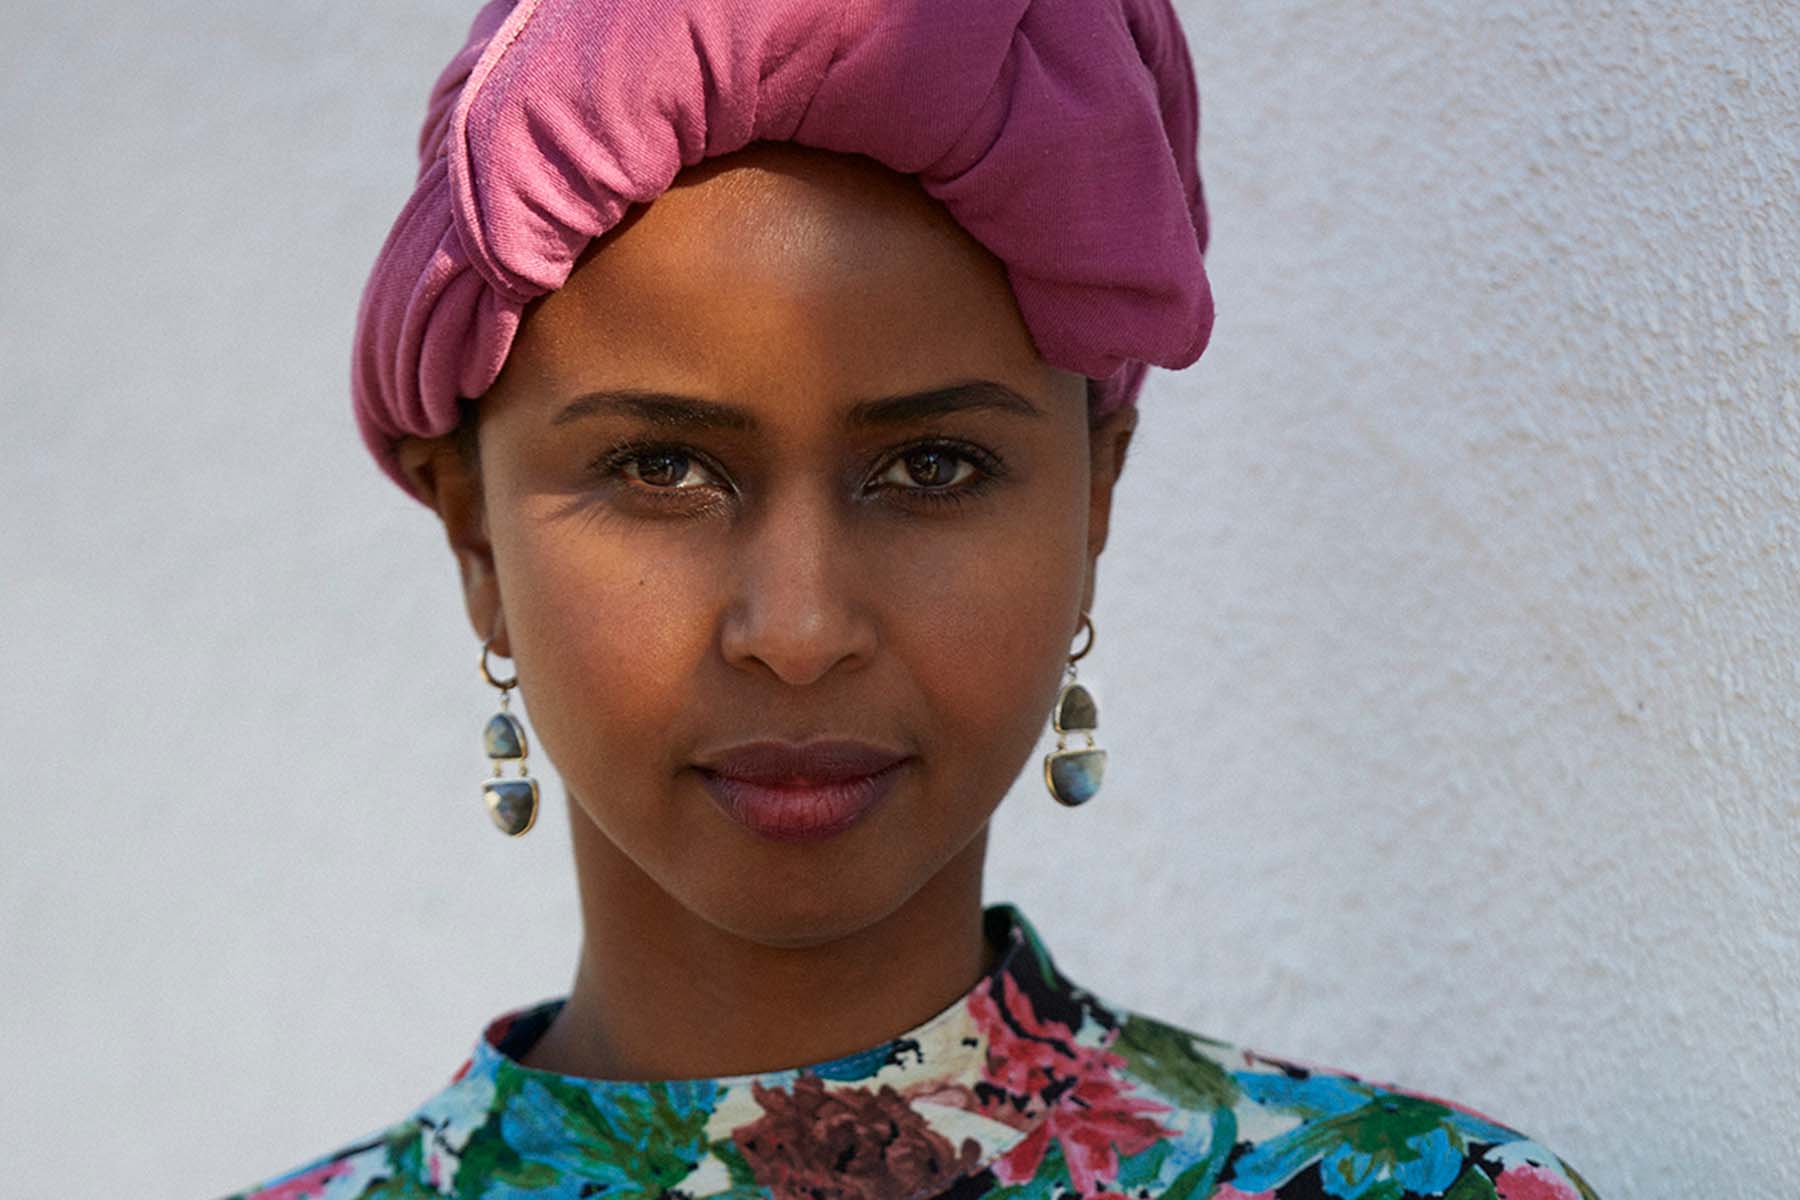 A close, head-and-shoulders portrait of Nadifa Mohamed, she is wearing a pink head scarf